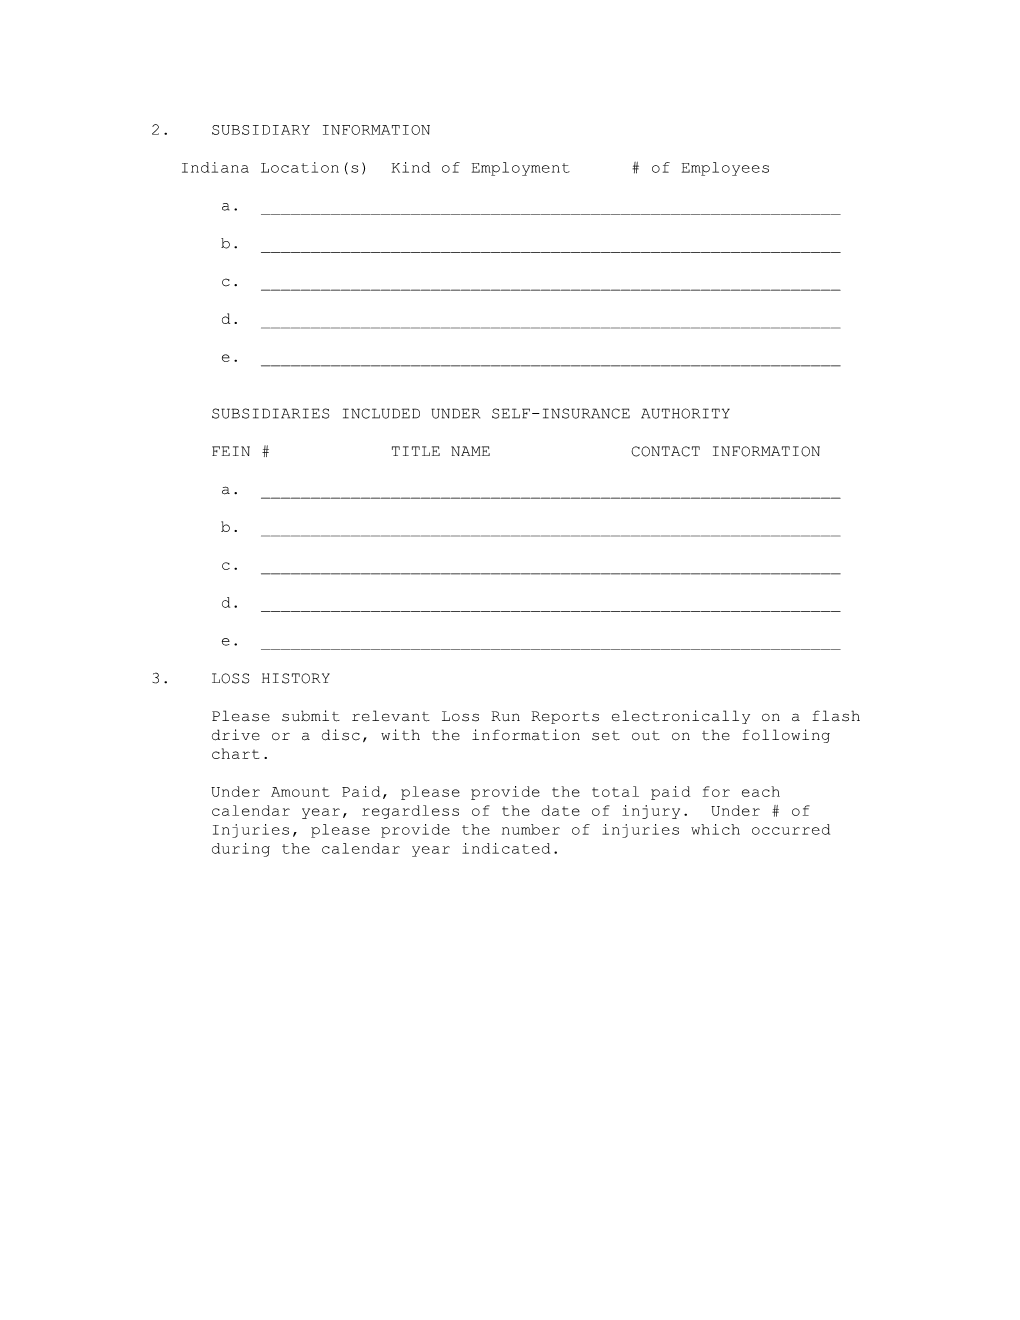 Workers Compensation Board of Indiana State Form 18488 9R13/3-990